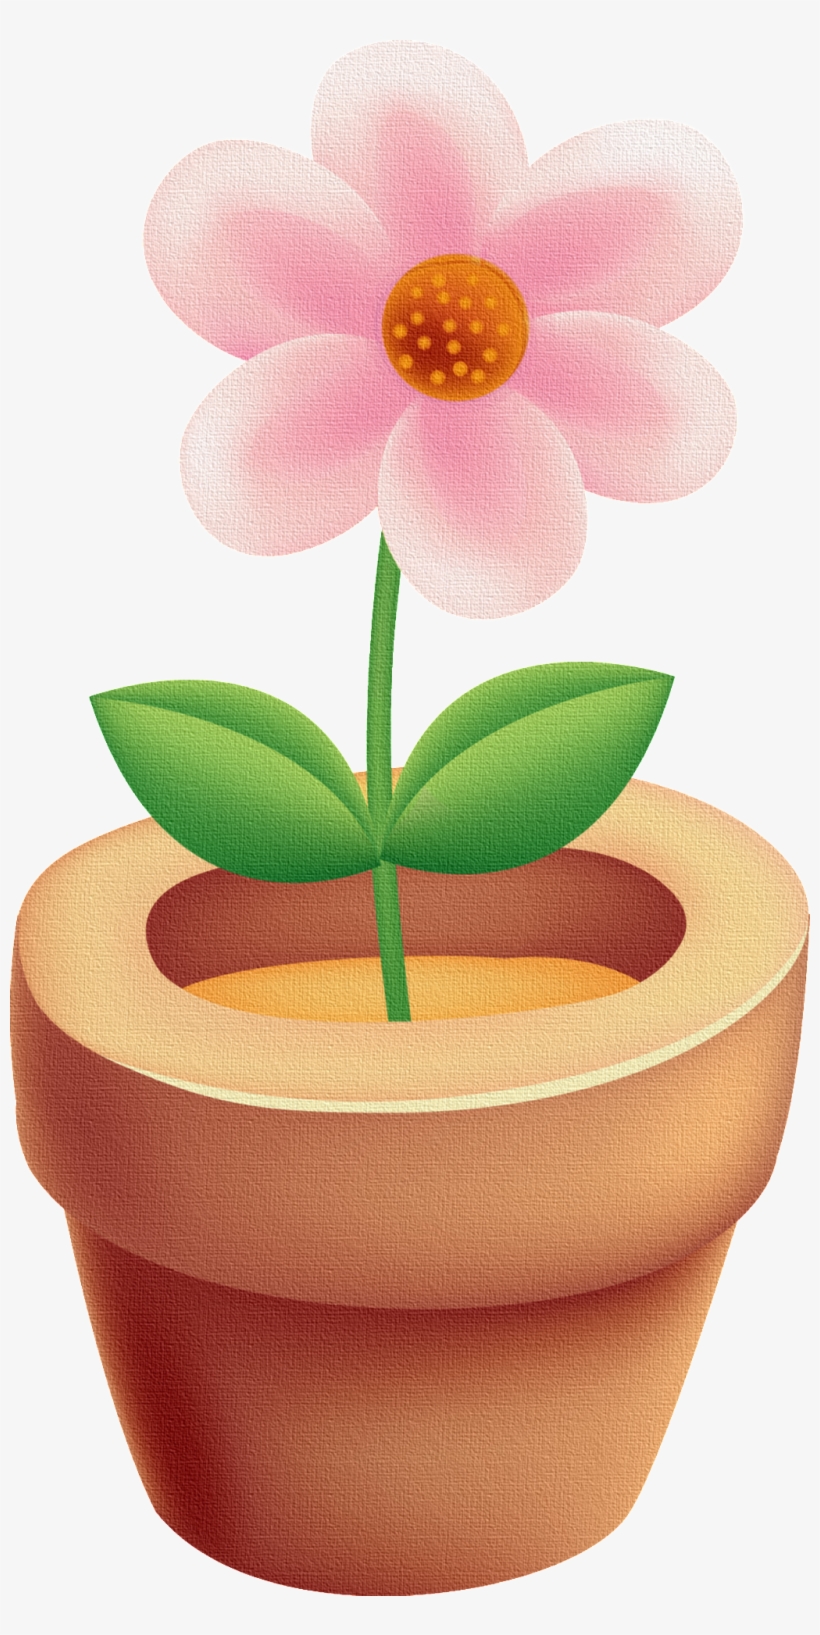 Hand Painted Potted Transparent With A Pot Of Flowers - Maceta Con Flor Png, transparent png #4136456